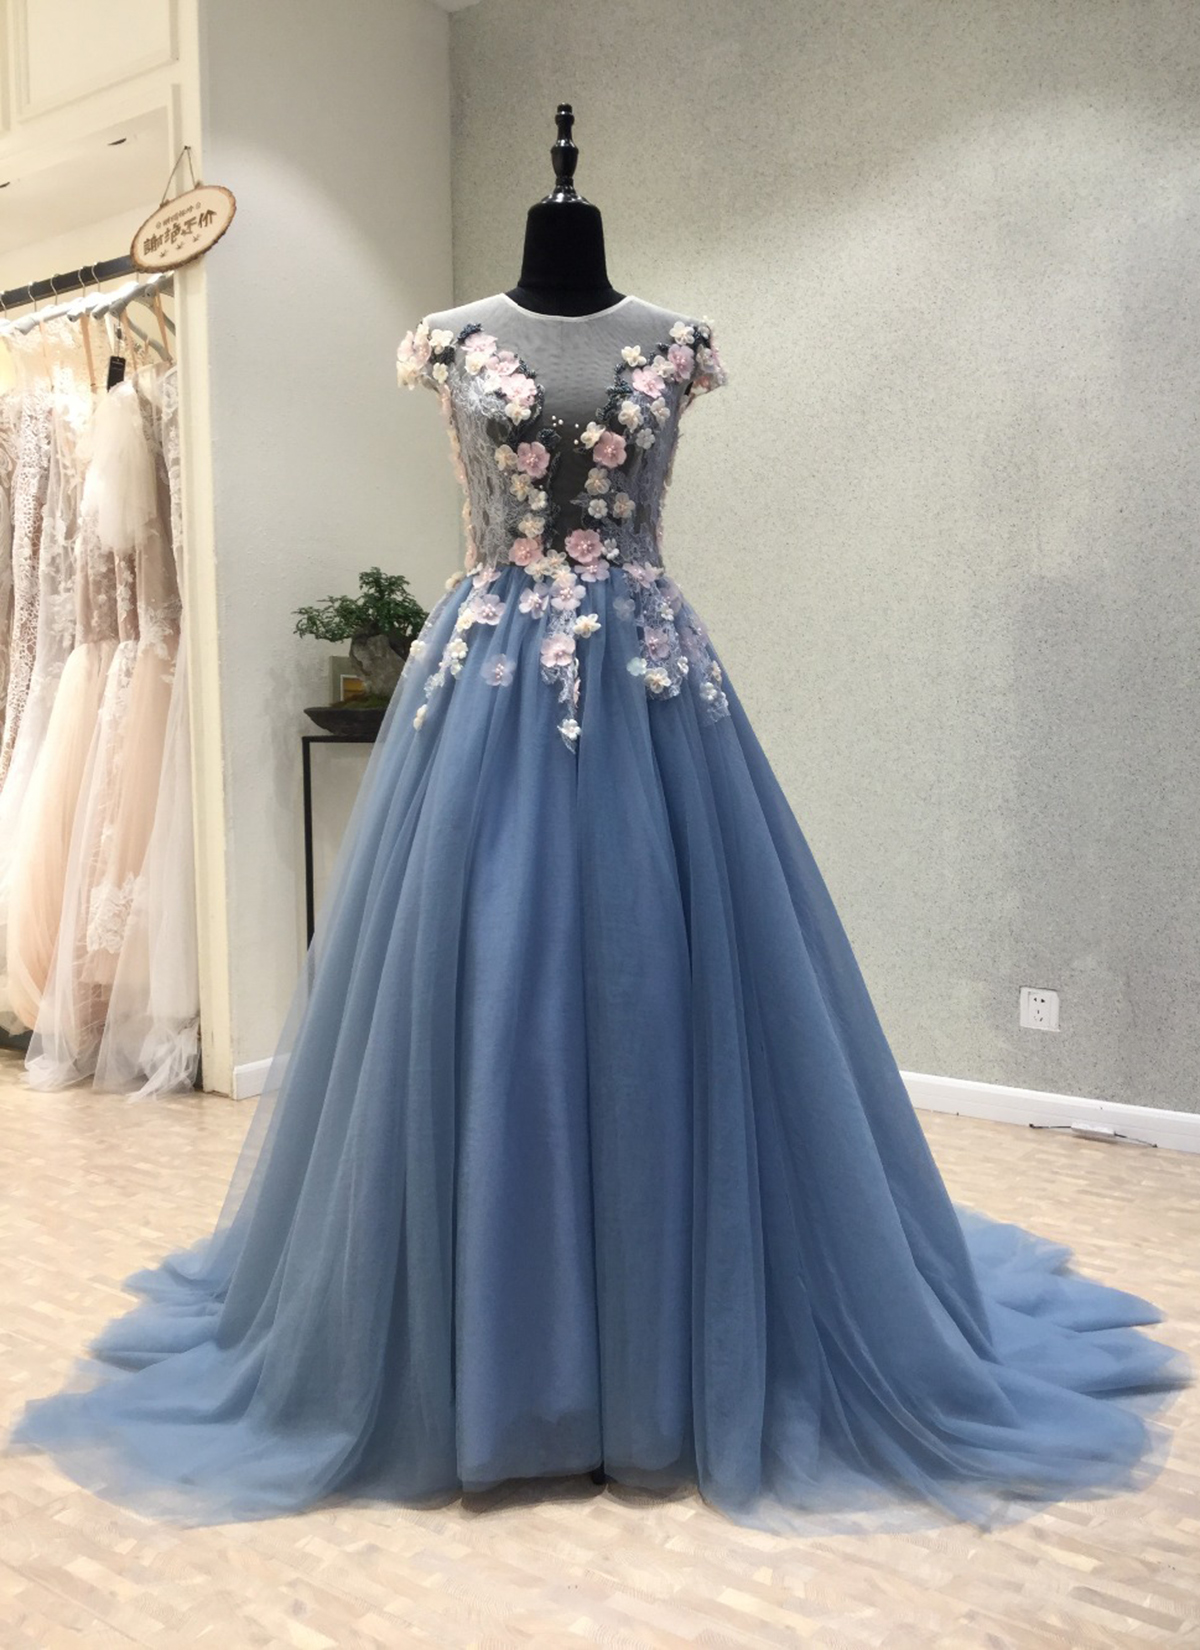 P3473 Blue Tulle See Through Back Long 3d Lace Flower Evening Dress, Long Senior Prom Dress With Cap Sleeves